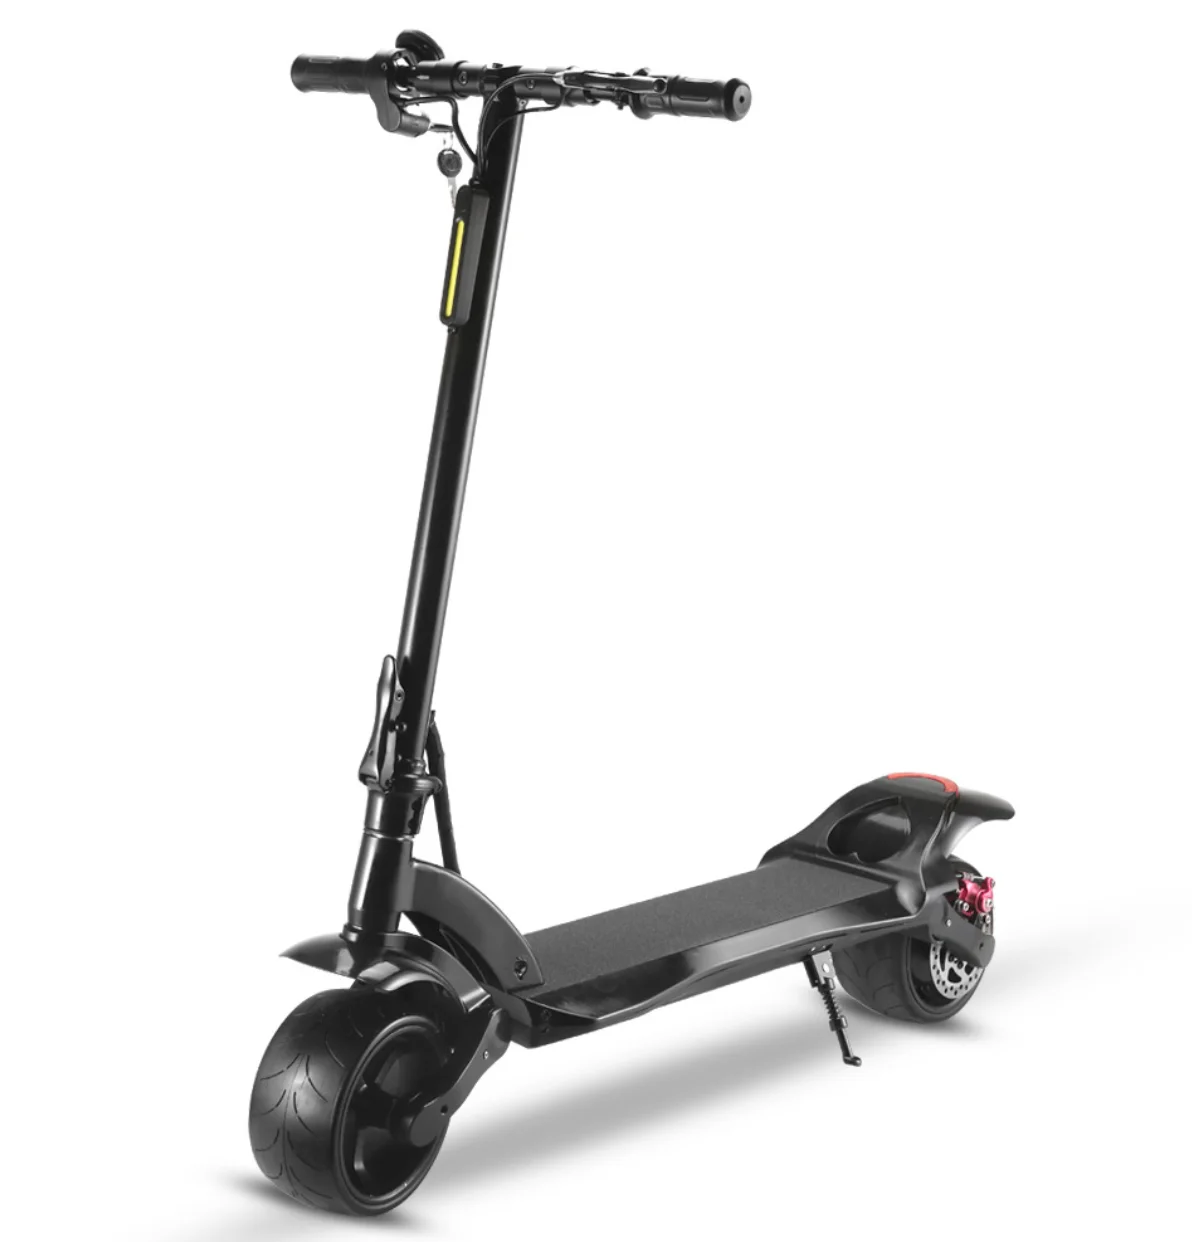 

1000w 3200W cheap europe warehouse 8 10inch scooter monopattino elettrico trottinettes patineta electrica adult electric scooter, Black